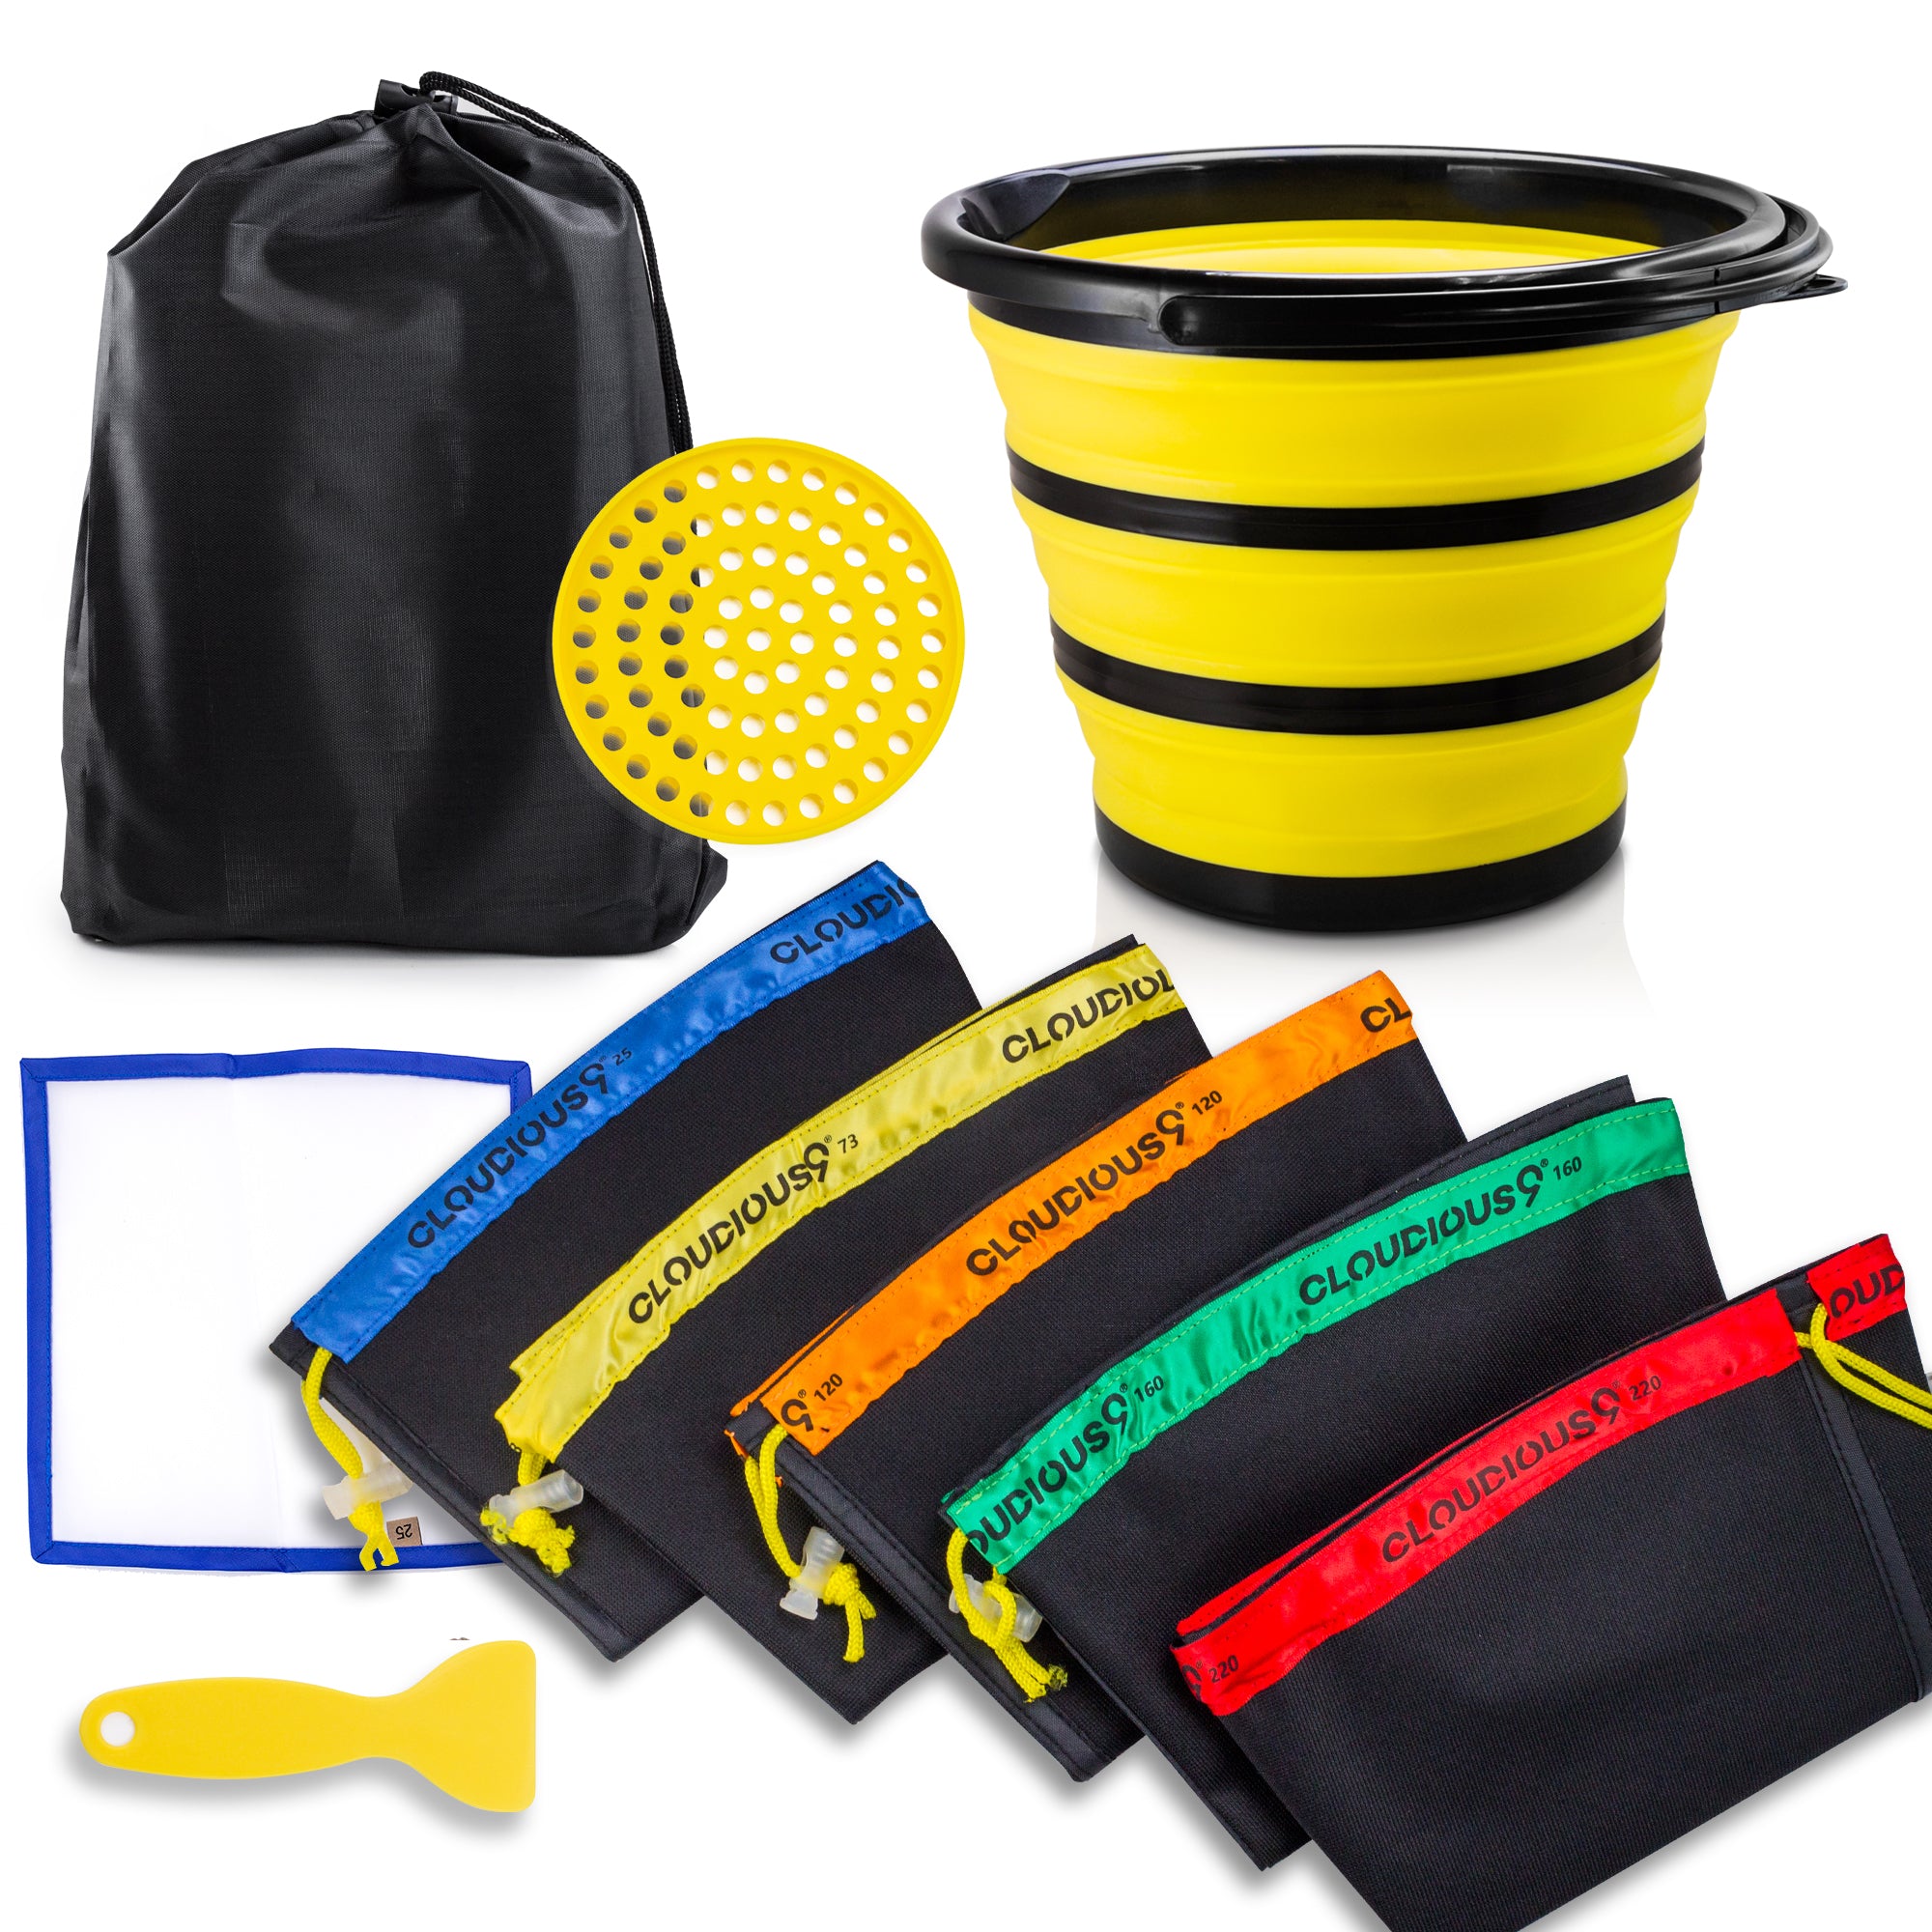 The Vortex9 cold water hash extraction kit including a collapsible black and yellow vortex bucket, a series of multicolored bags, screens and scraper